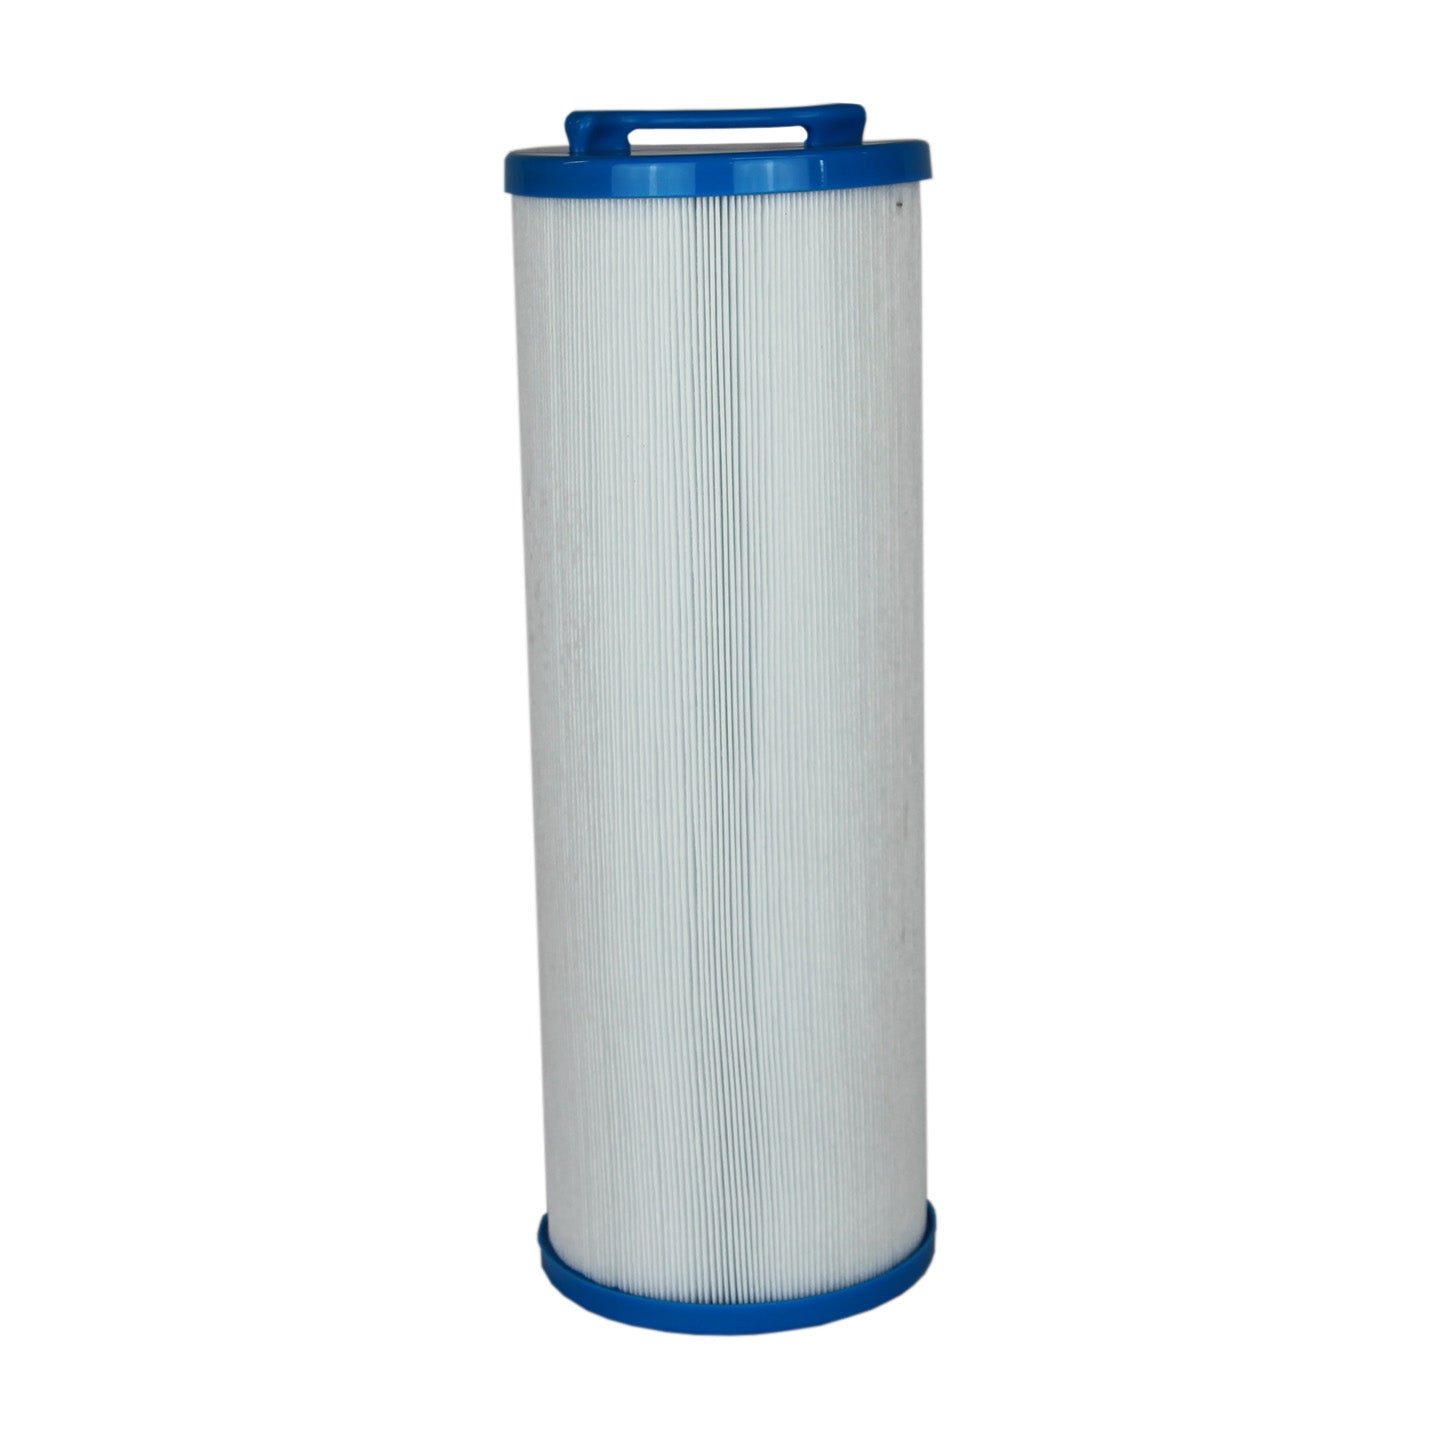 Tier1 Brand Replacement Pool and Spa Filter for 817-4050